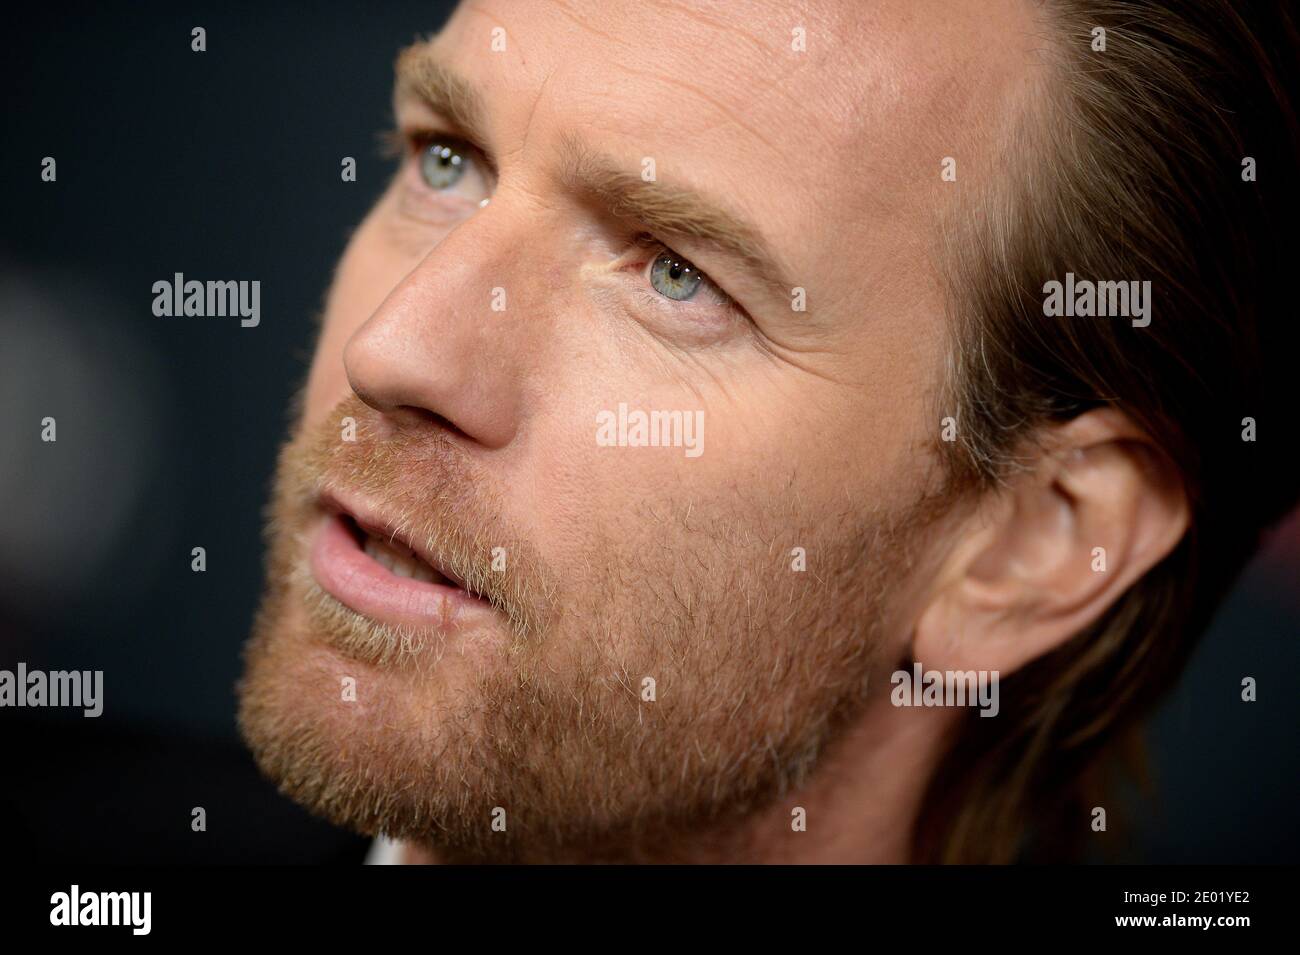 Ewan McGregor arrives at the premiere of The Weinstein Company's 'August: Osage County' at Regal Cinemas L.A. Live in Los Angeles, CA, USA on December 16, 2013. Photo by Lionel Hahn/ABACAPRESS.COM Stock Photo